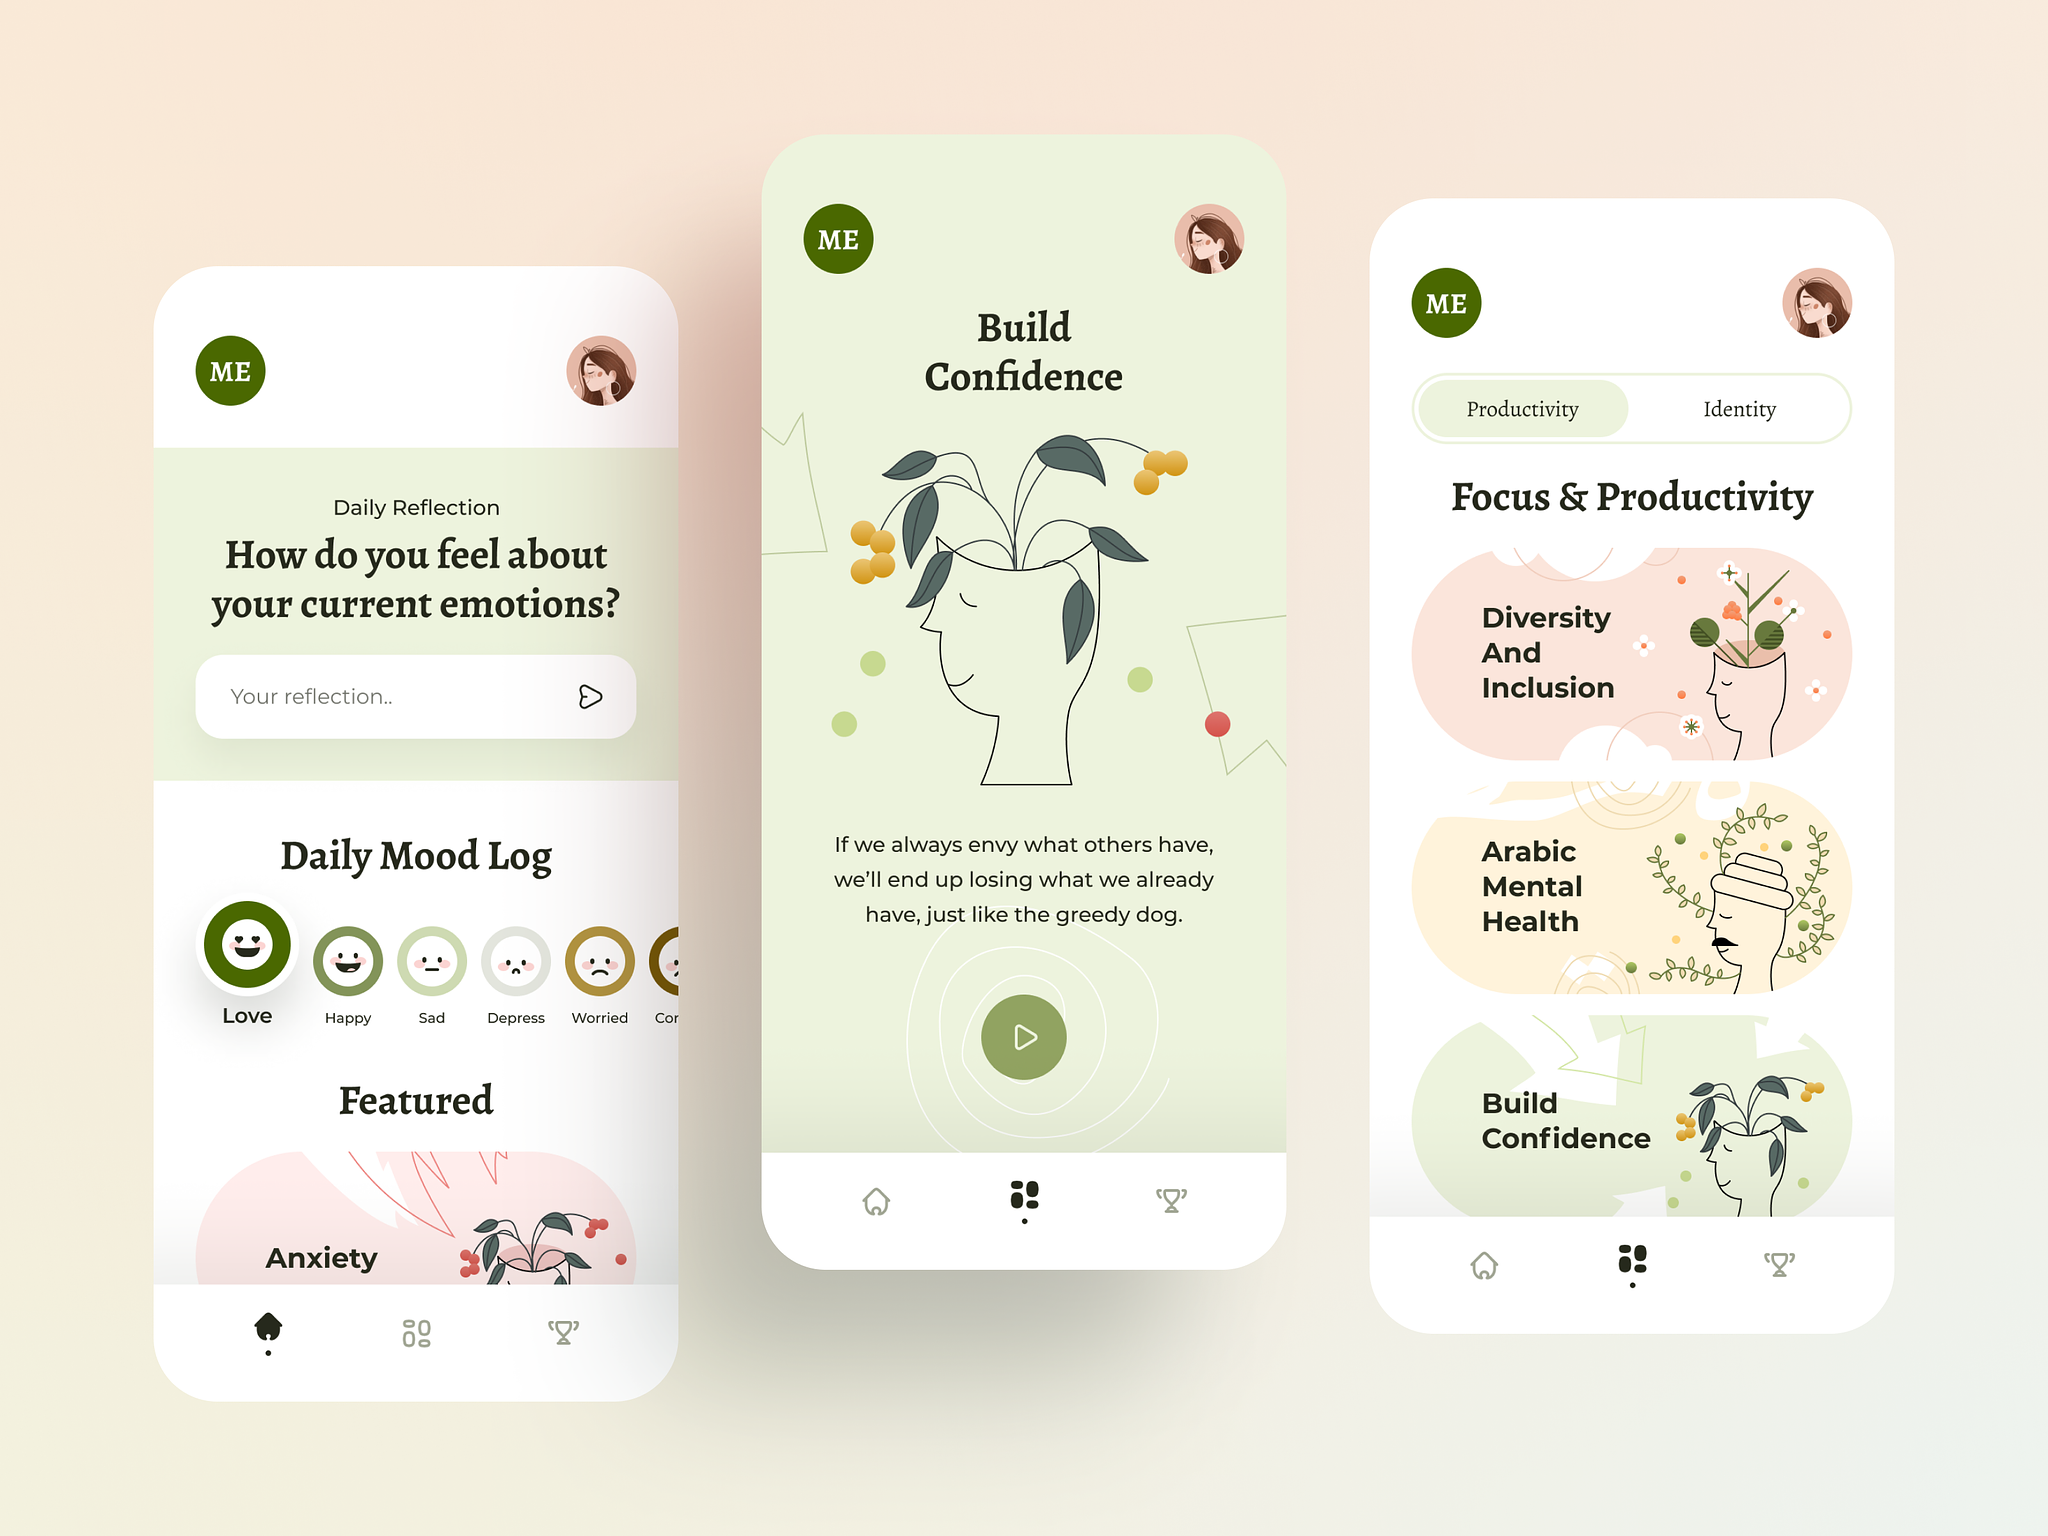 To develop a mental health app, you can add features for self help for anxiety, bipolar disorder, and online therapy with health professionals (*image by [Purrweb UI](https://dribbble.com/purrwebui){ rel="nofollow" target="_blank" .default-md}*)